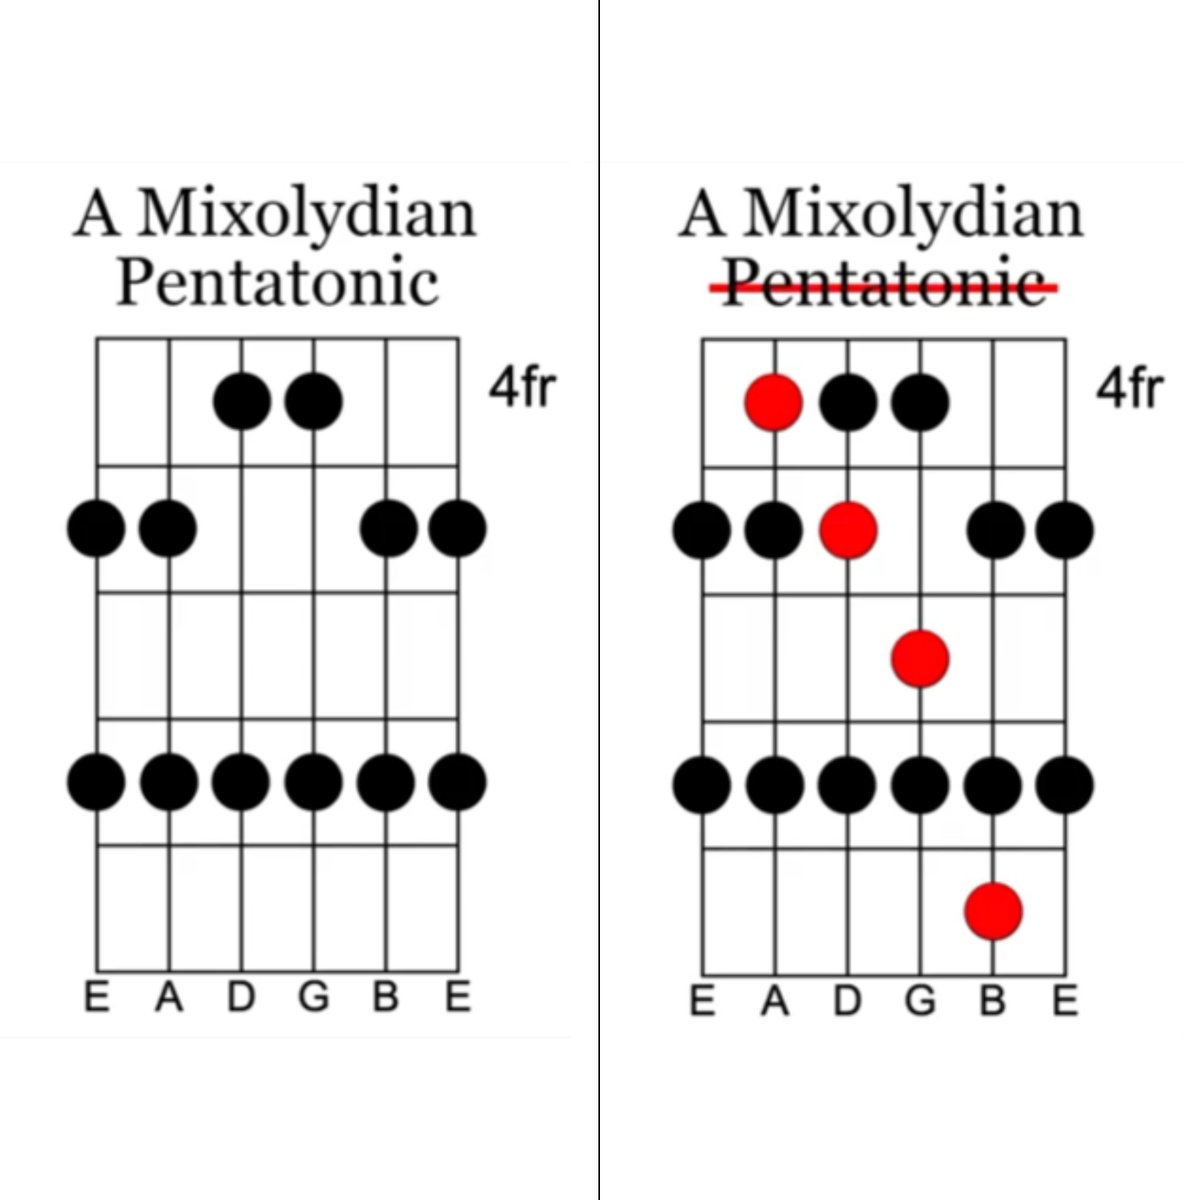 Brandon D'Eon on X: The major pentatonic scale is really just a skeleton  of the major scale, & just like how the major has different shapes, the  pentatonic does too. These are